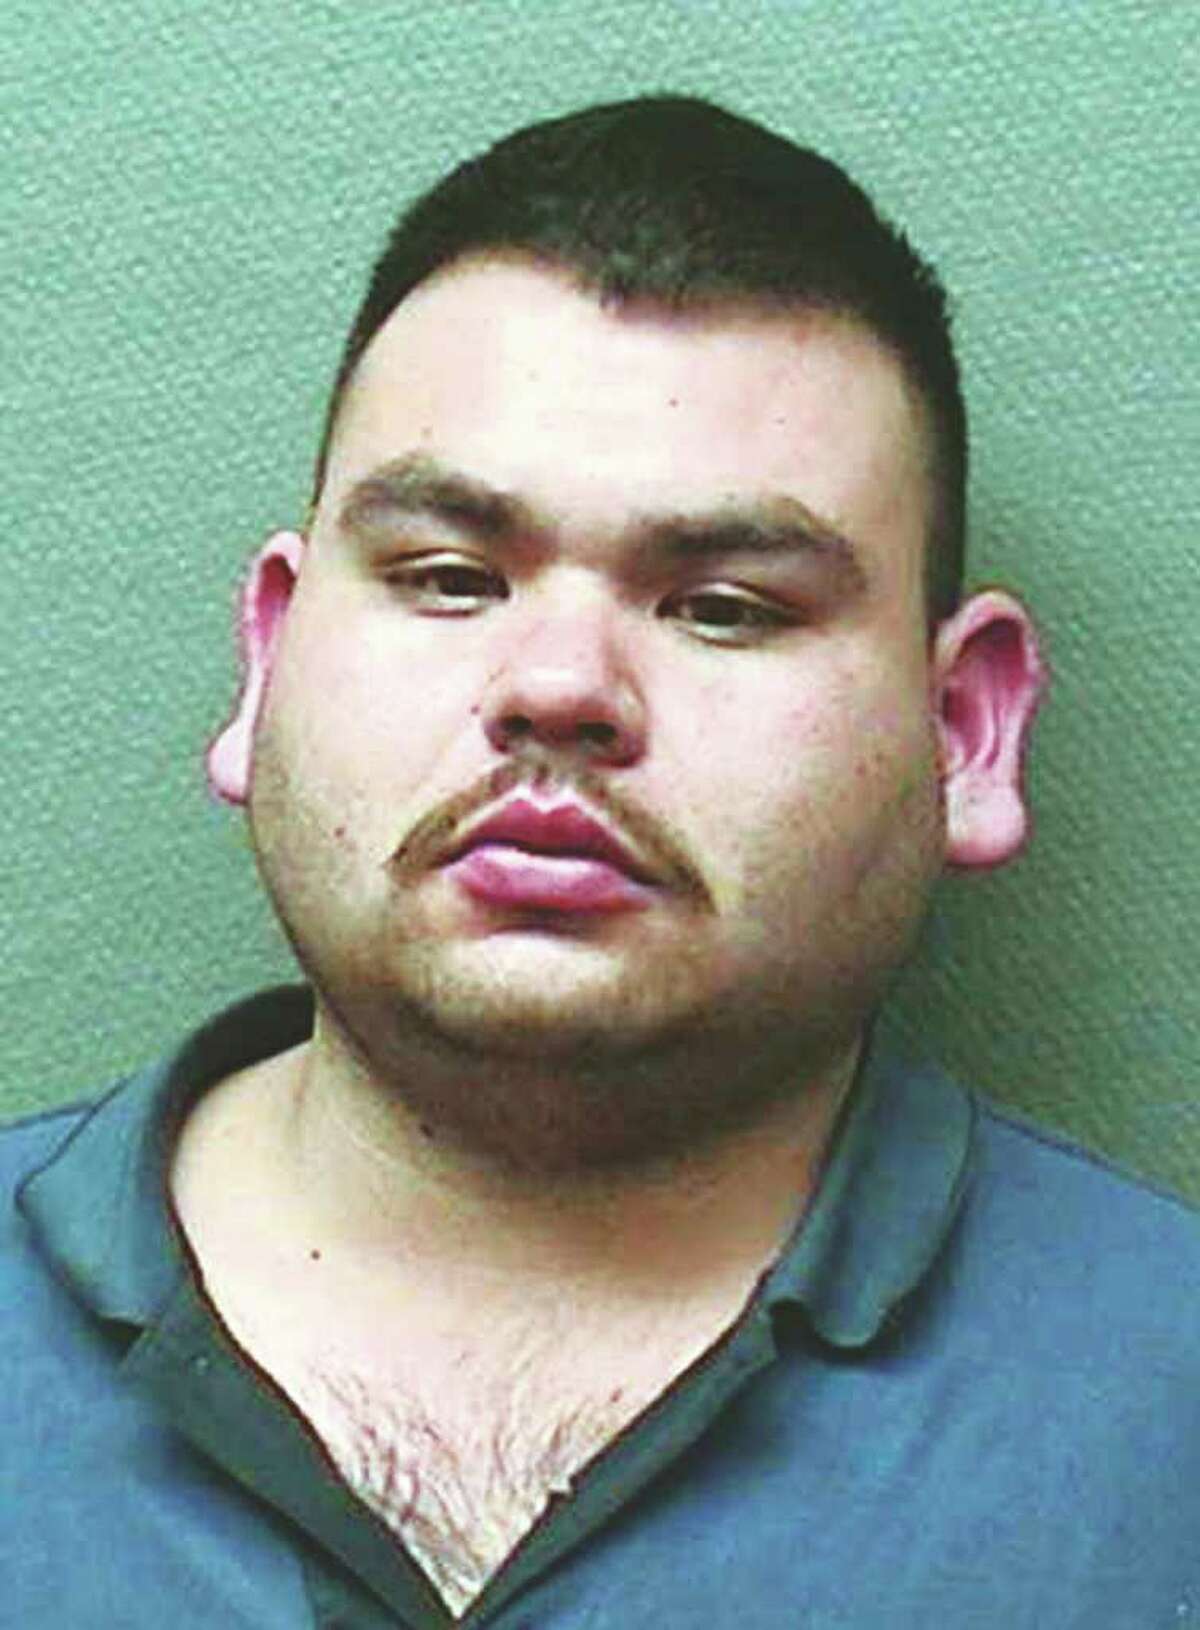 This undated photo provided by the Laredo Police Department shows Gerardo Castillo Chavez in Laredo, Texas. Castillo _ indicted in 2008 under the assumed name "Armando Garcia" and known as "Cachetes," or "cheeks" in Spanish, faces up to life in prison if convicted in U.S. District Court on conspiracy, drug and weapons charges. Jurors deliberated for about five hours Wednesday and were scheduled to resume discussions Thursday morning Feb. 4, 2010.